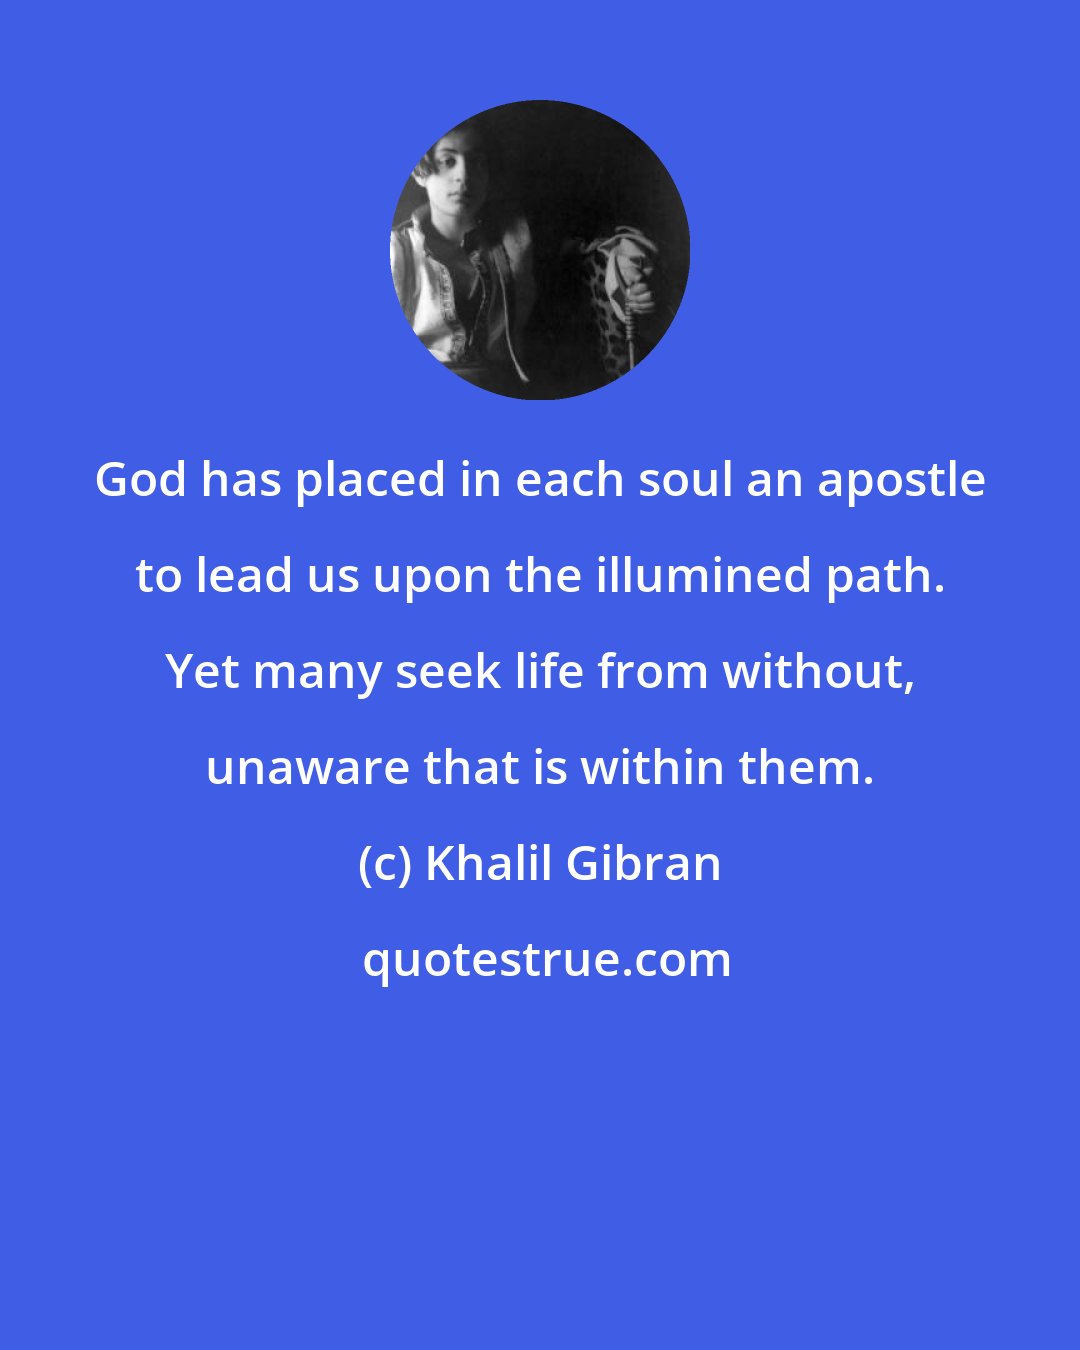 Khalil Gibran: God has placed in each soul an apostle to lead us upon the illumined path. Yet many seek life from without, unaware that is within them.